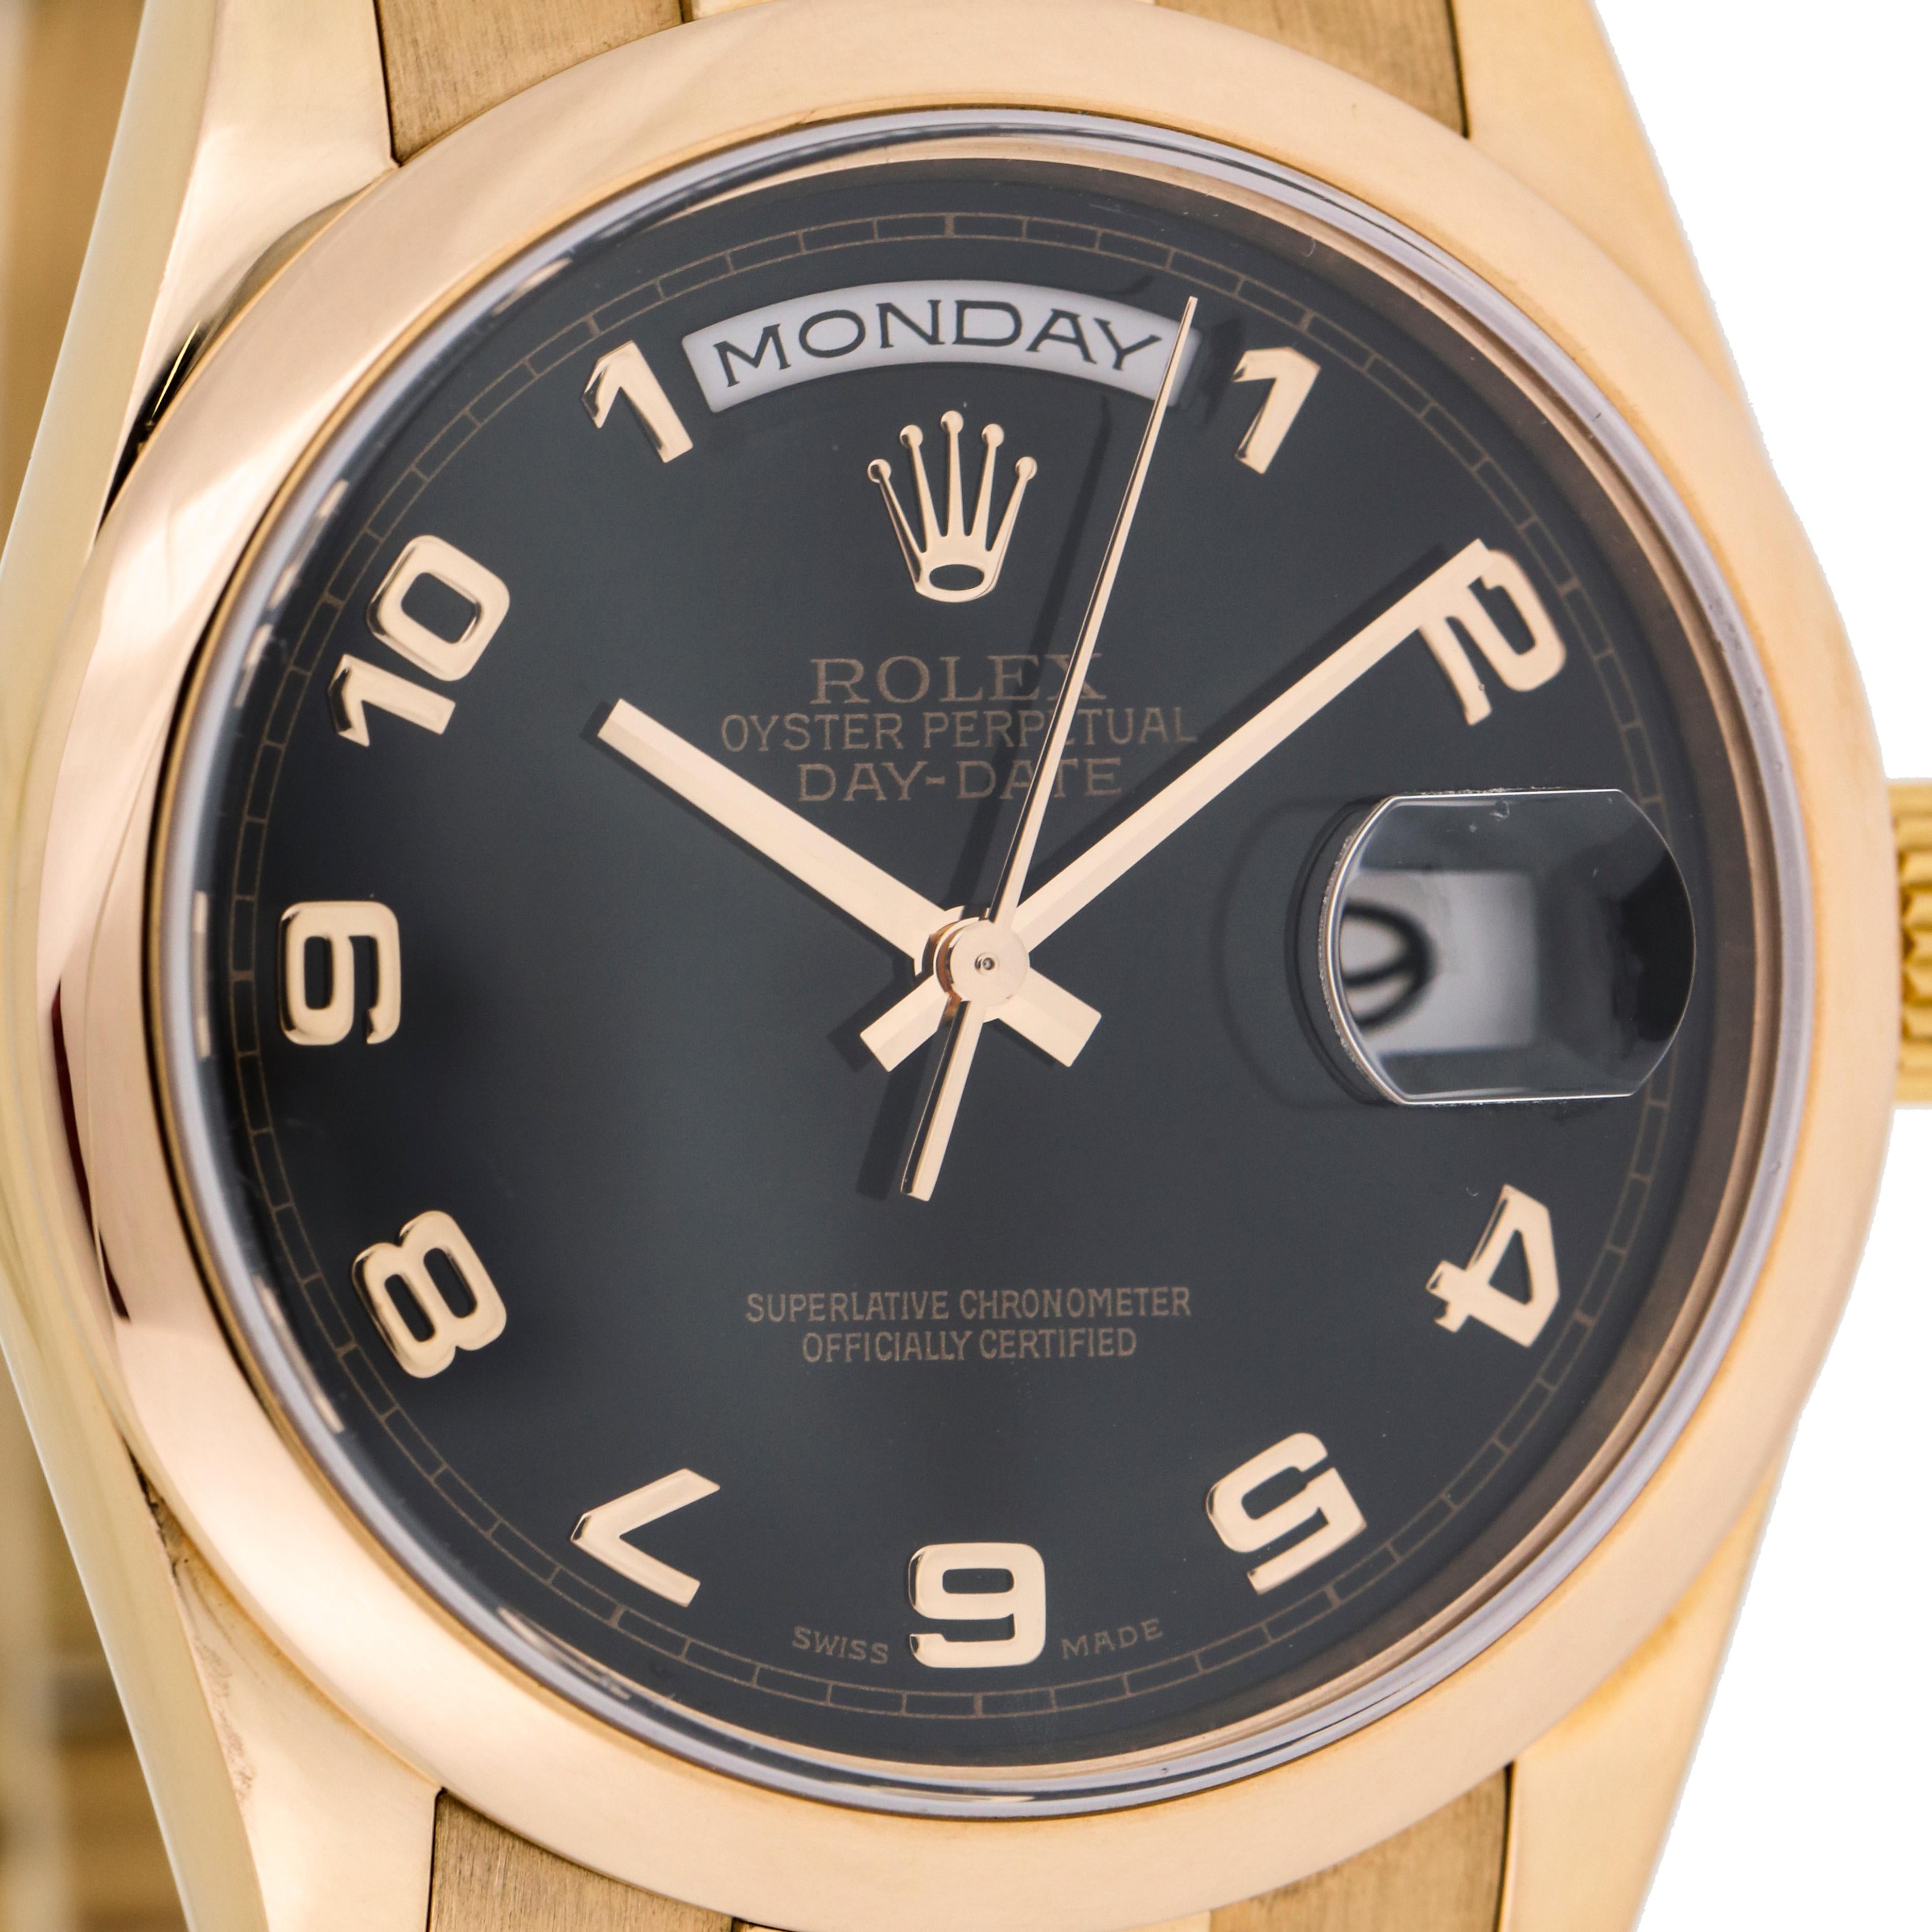 Men's Rolex Day-Date watch with president bracelet and dome bezel in 18-karat Everose gold. Black dial with Arabic numeral hour markers. Screw down crown and case back. Deployment Buckle. Swiss Made. 

Case Size, 36mm
Bracelet Length, 7.5